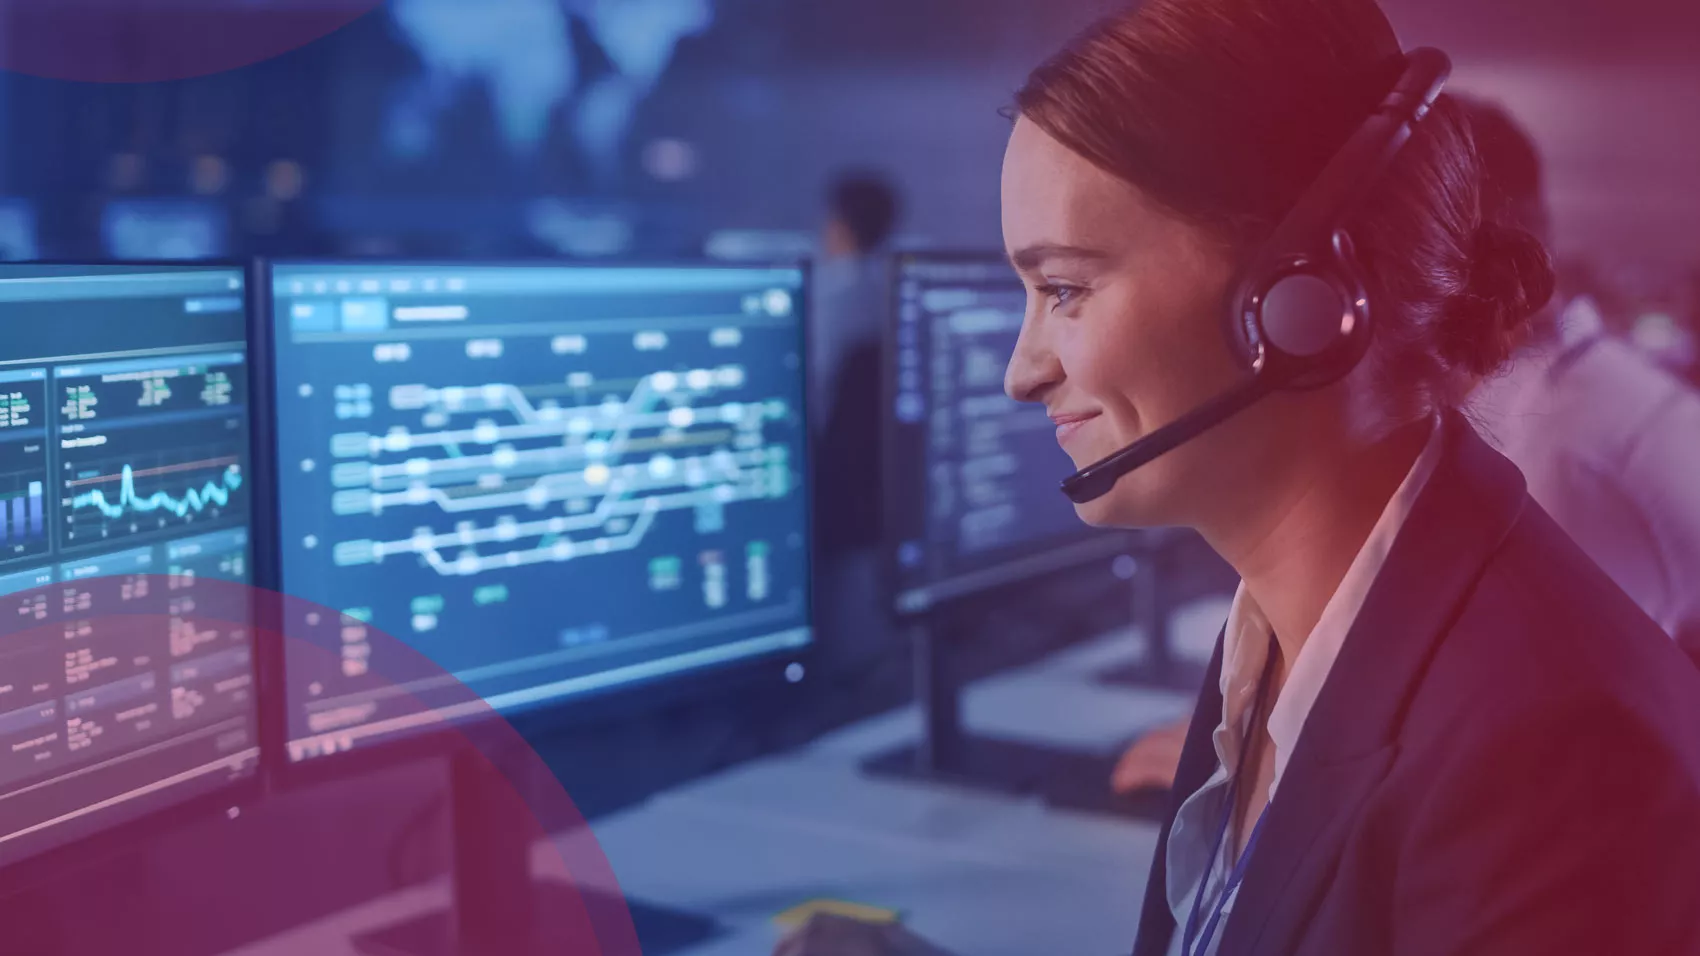 Cloud-based Call Center leverages greater security